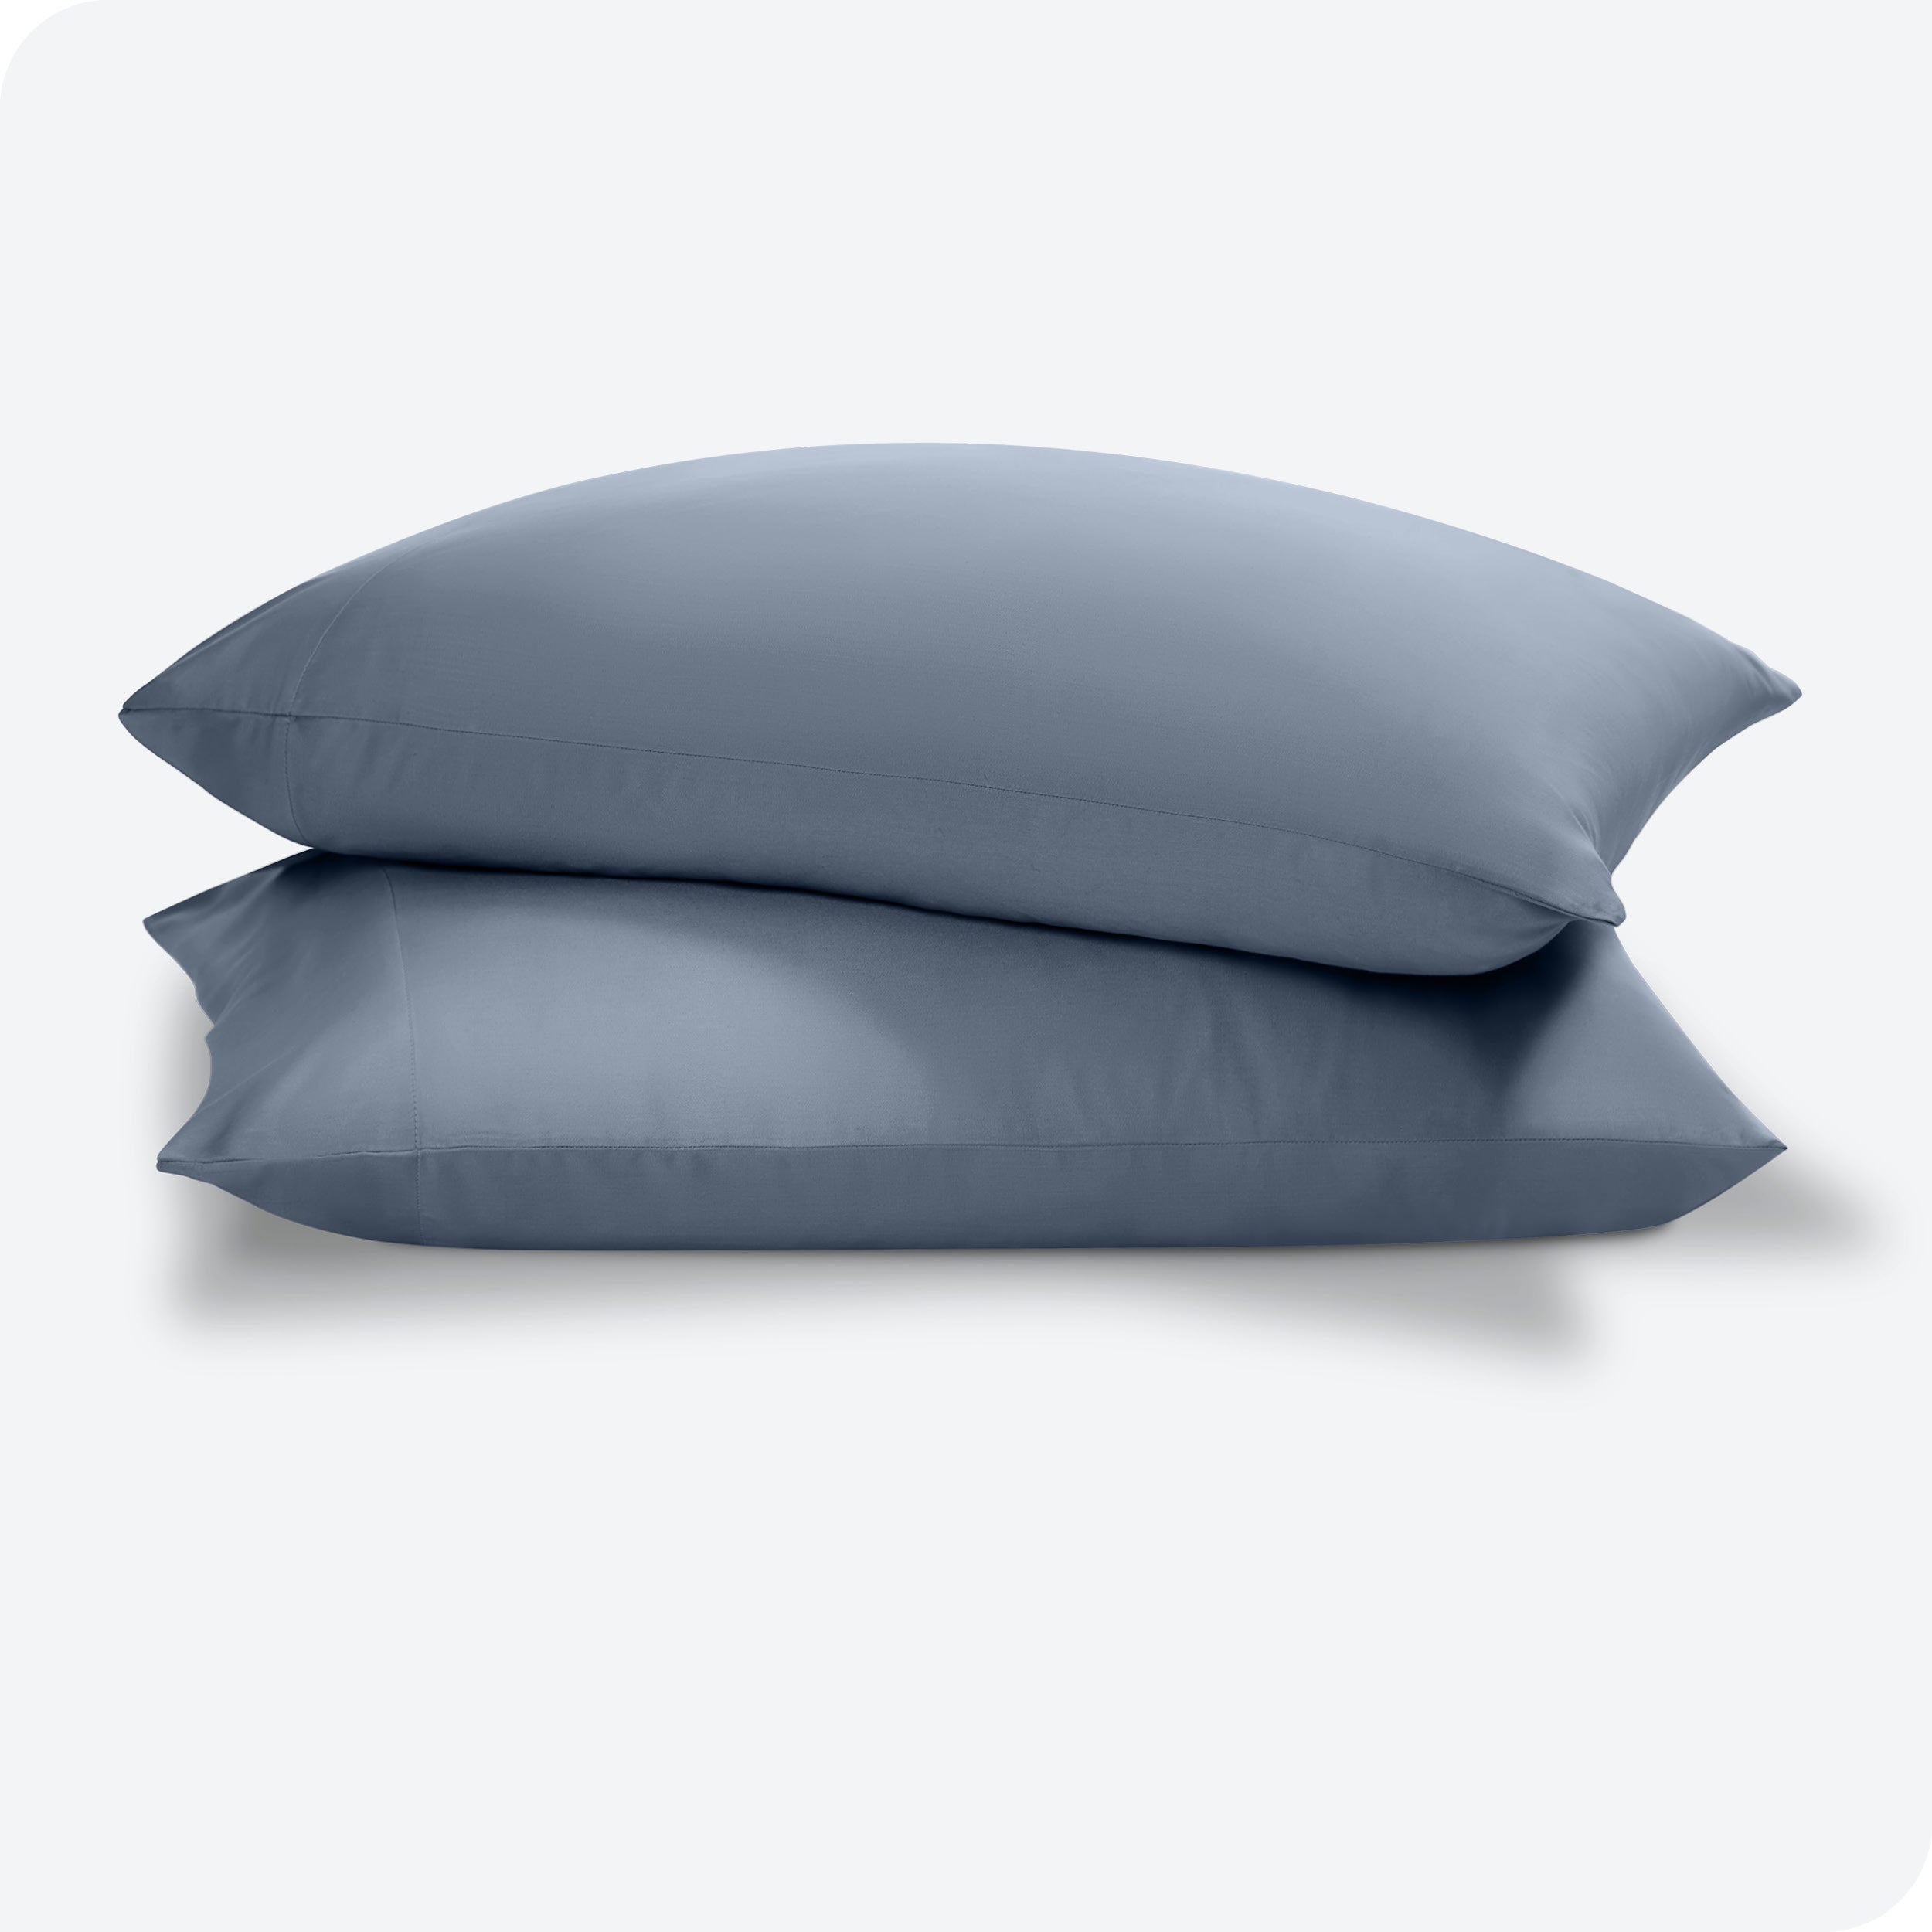 Two TENCEL™ pillowcases stacked